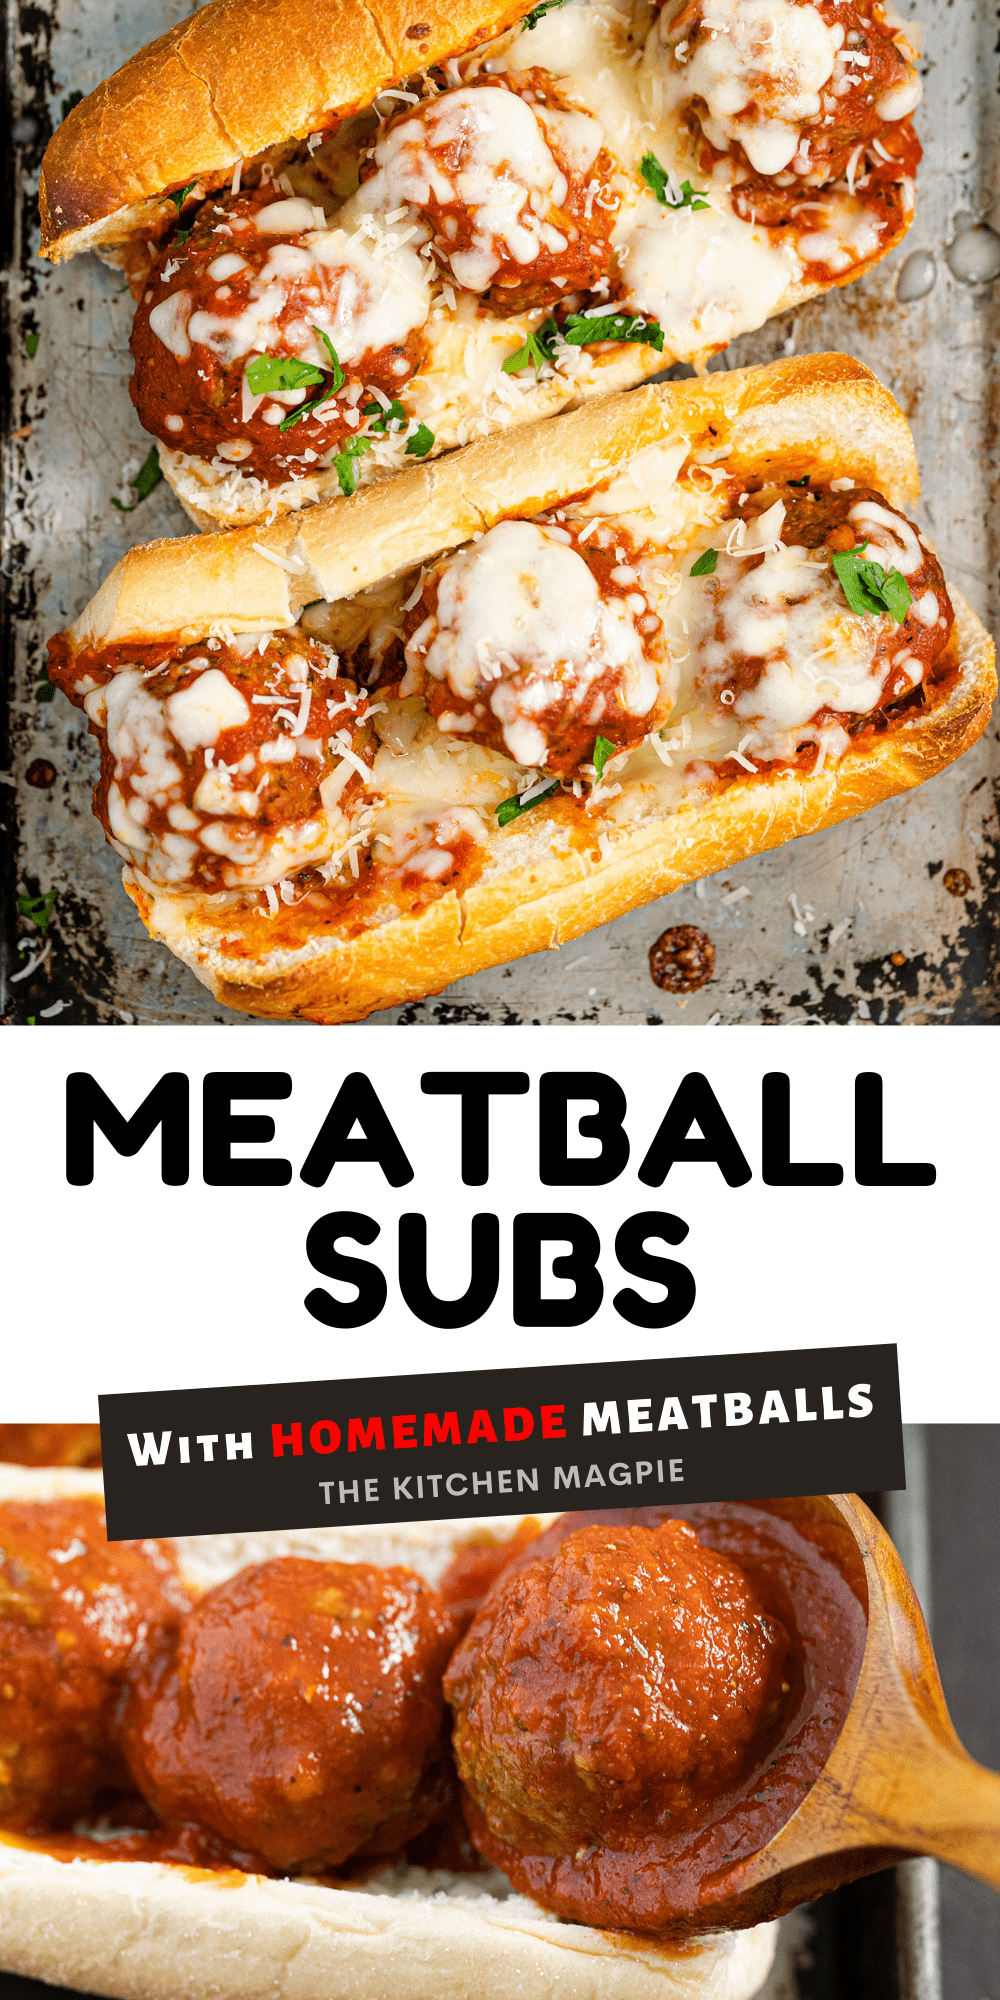 This amazing meatball sub recipe uses baked meatballs, garlic butter, and your favorite prepared four cheese pasta sauce to create an incredible sandwich. Every part of this recipe could be bought at the store or made from scratch if you're feeling fancy, it's up to you!